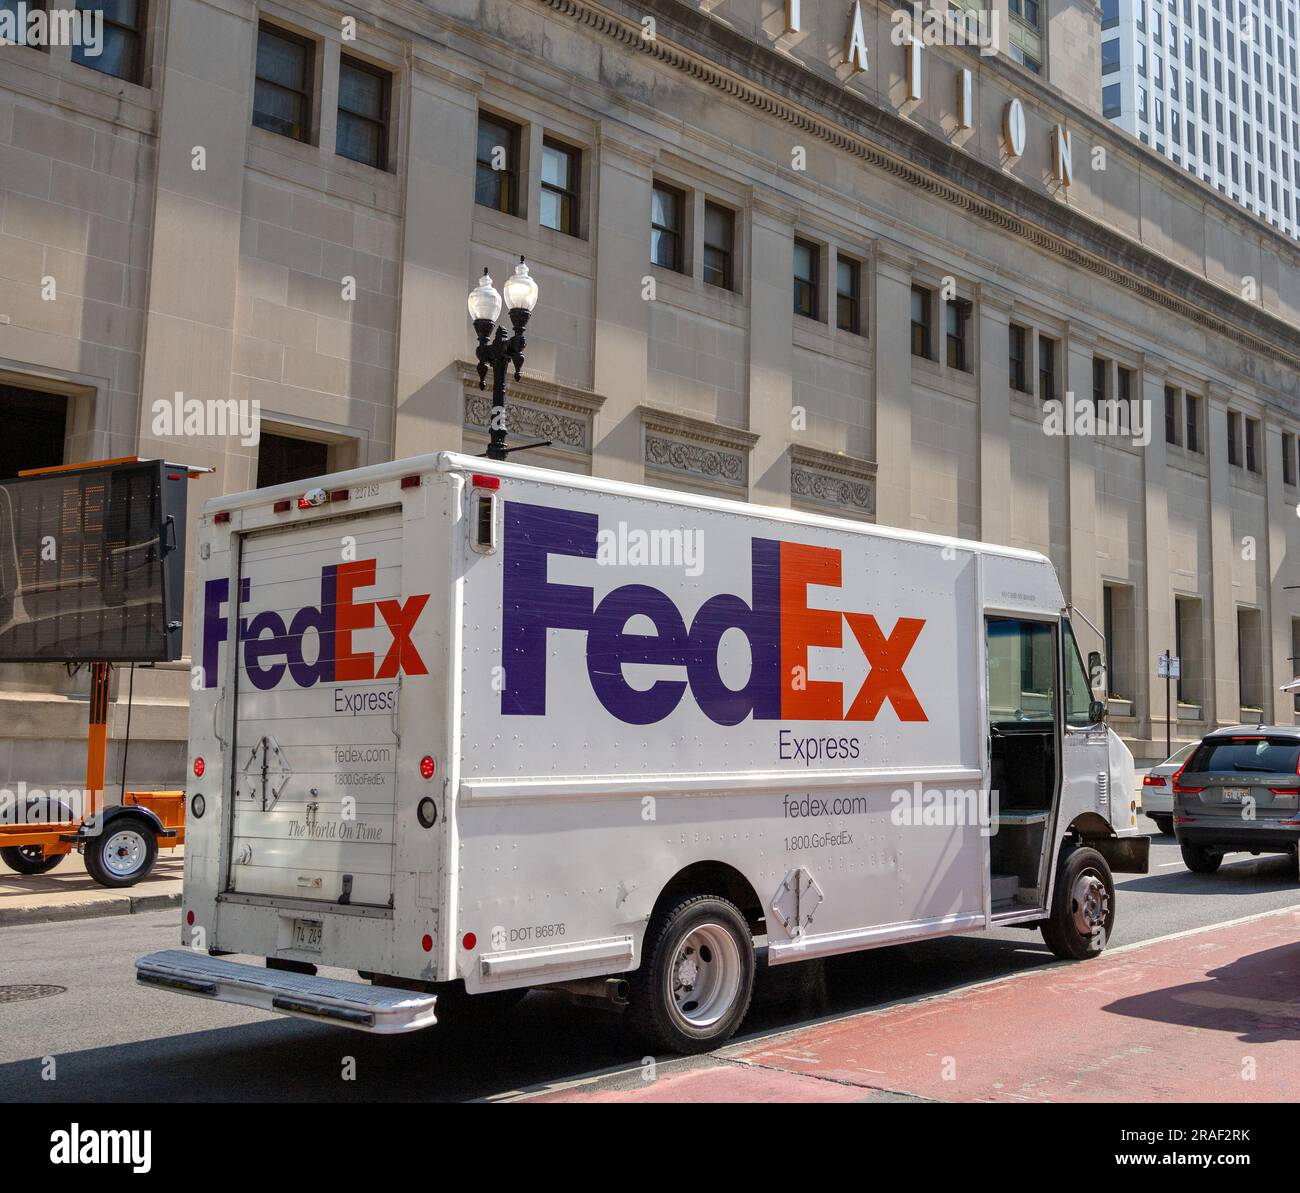 FedEx Express Delivery Van Parked Outside Amtrak Chicago Union Station, South Canal Street, Chicago Stock Photo